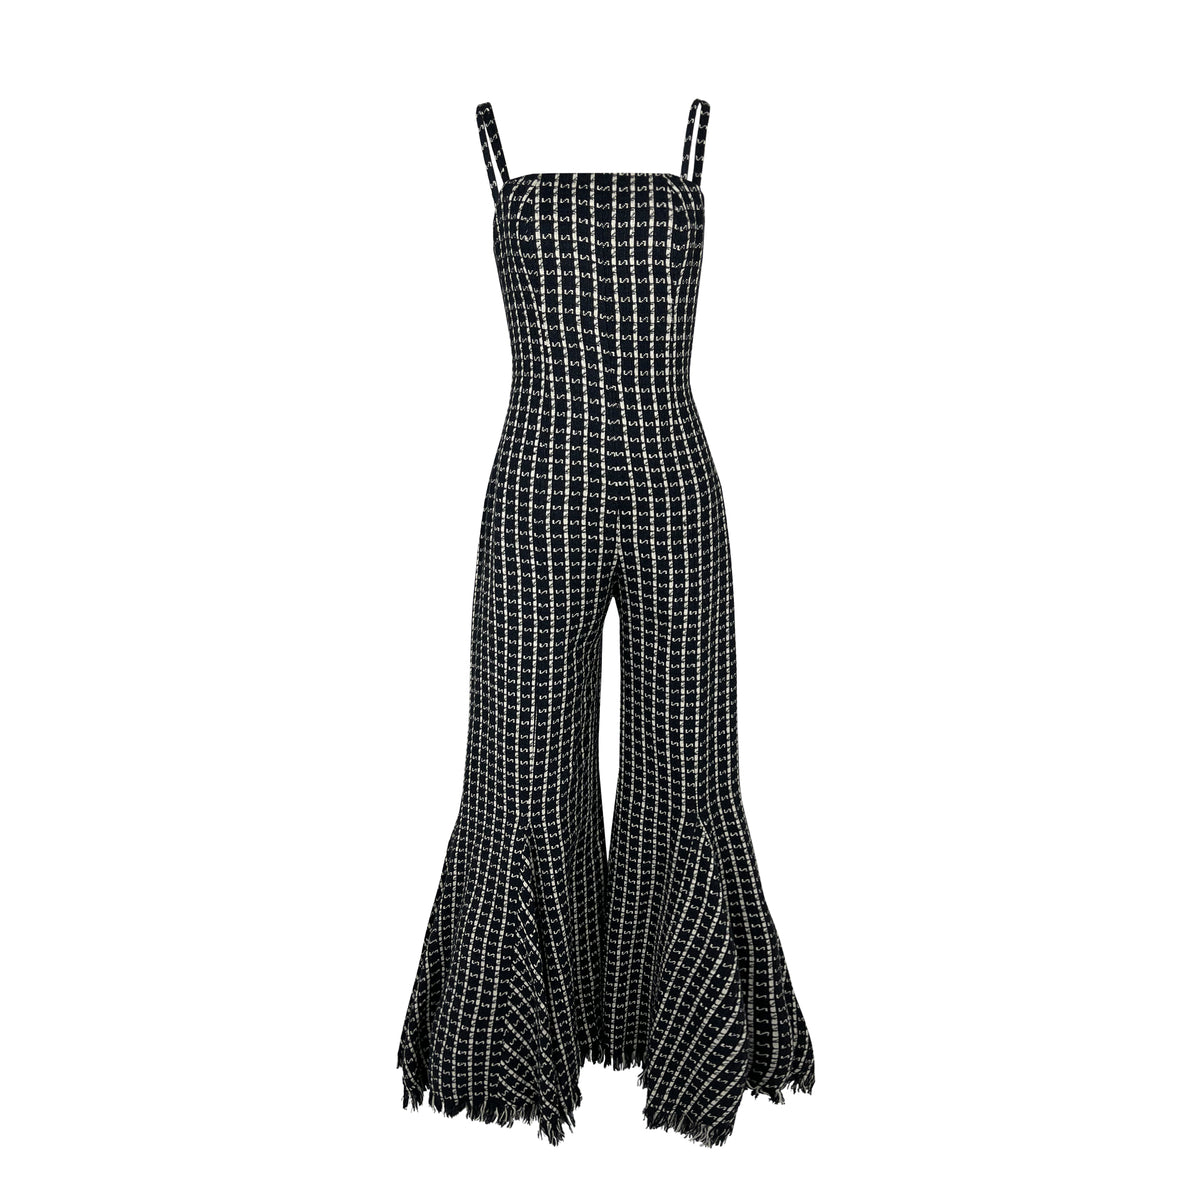 Black And White Check Jumpsuit! Material is Polyester Shop Now